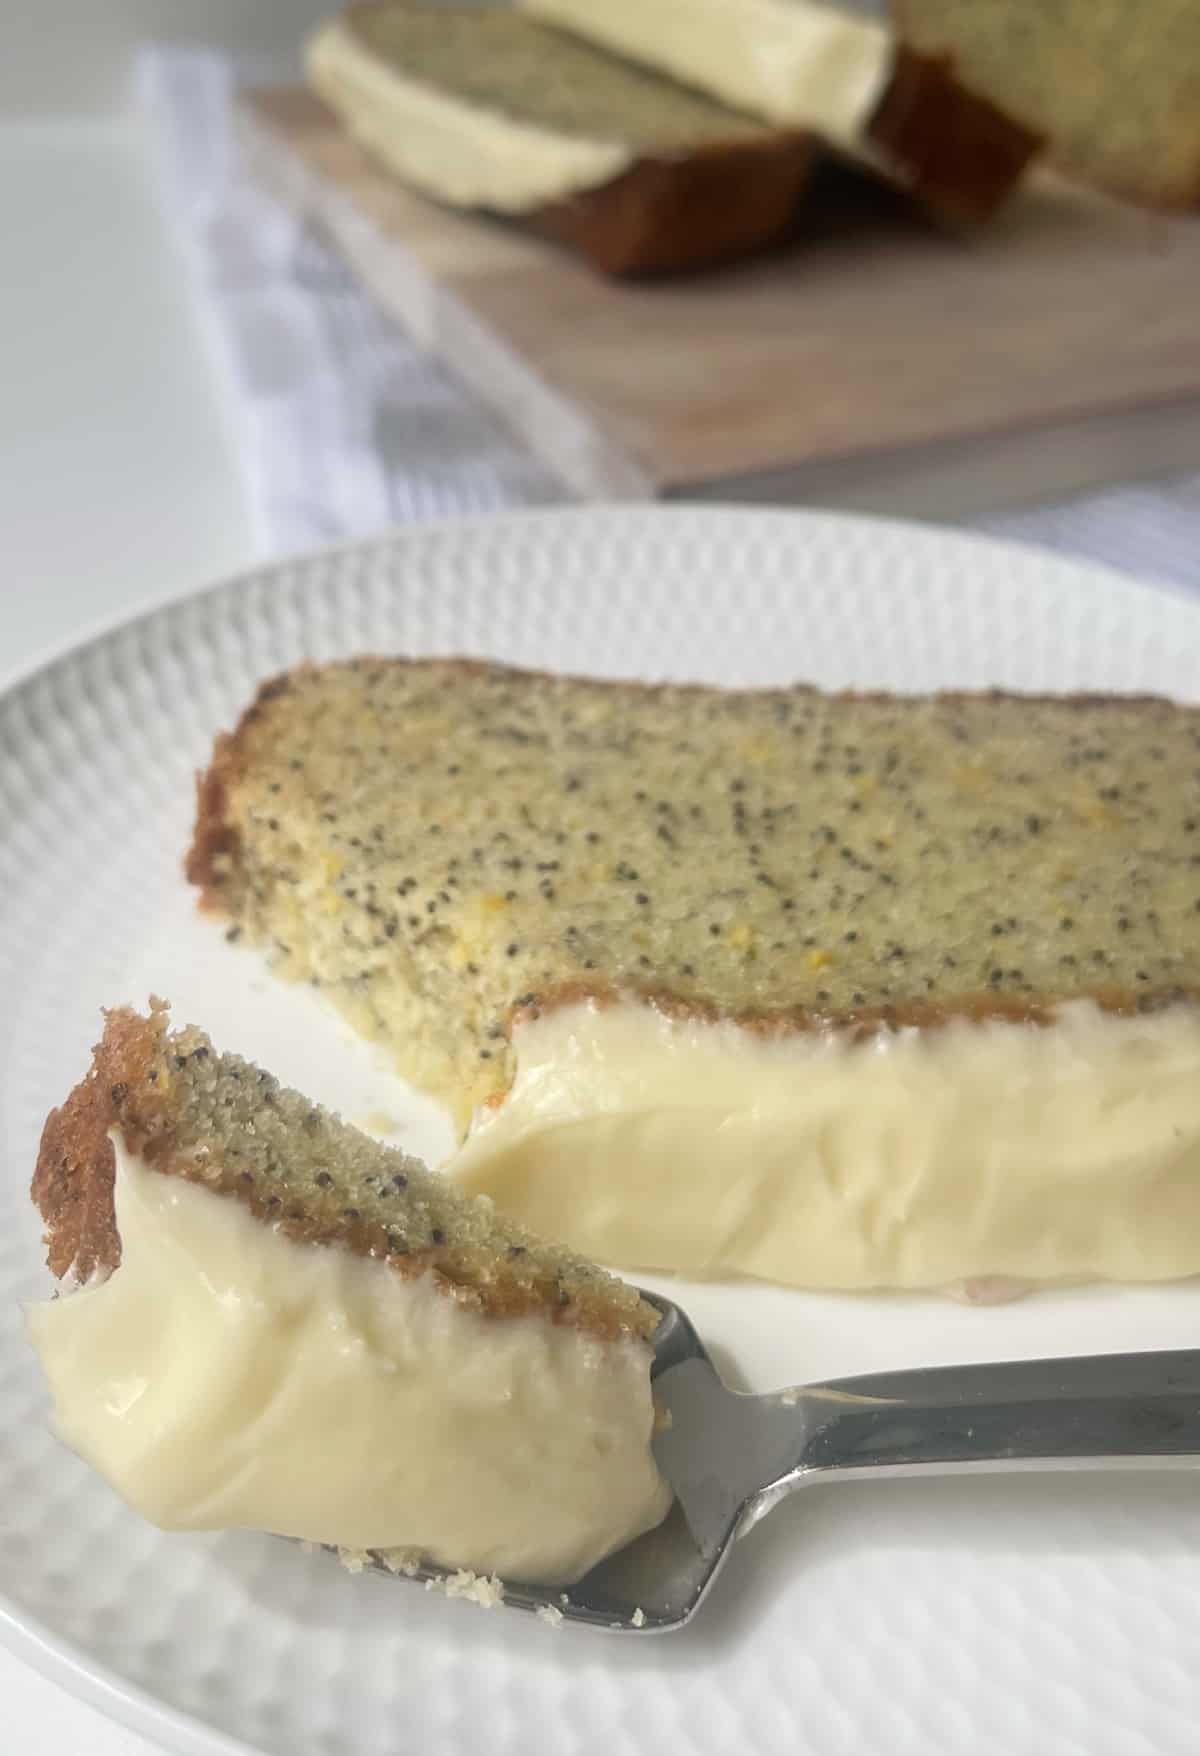 Fork holding a piece of lemon and poppy seed cake. in the background there is a slice of cake on plate.